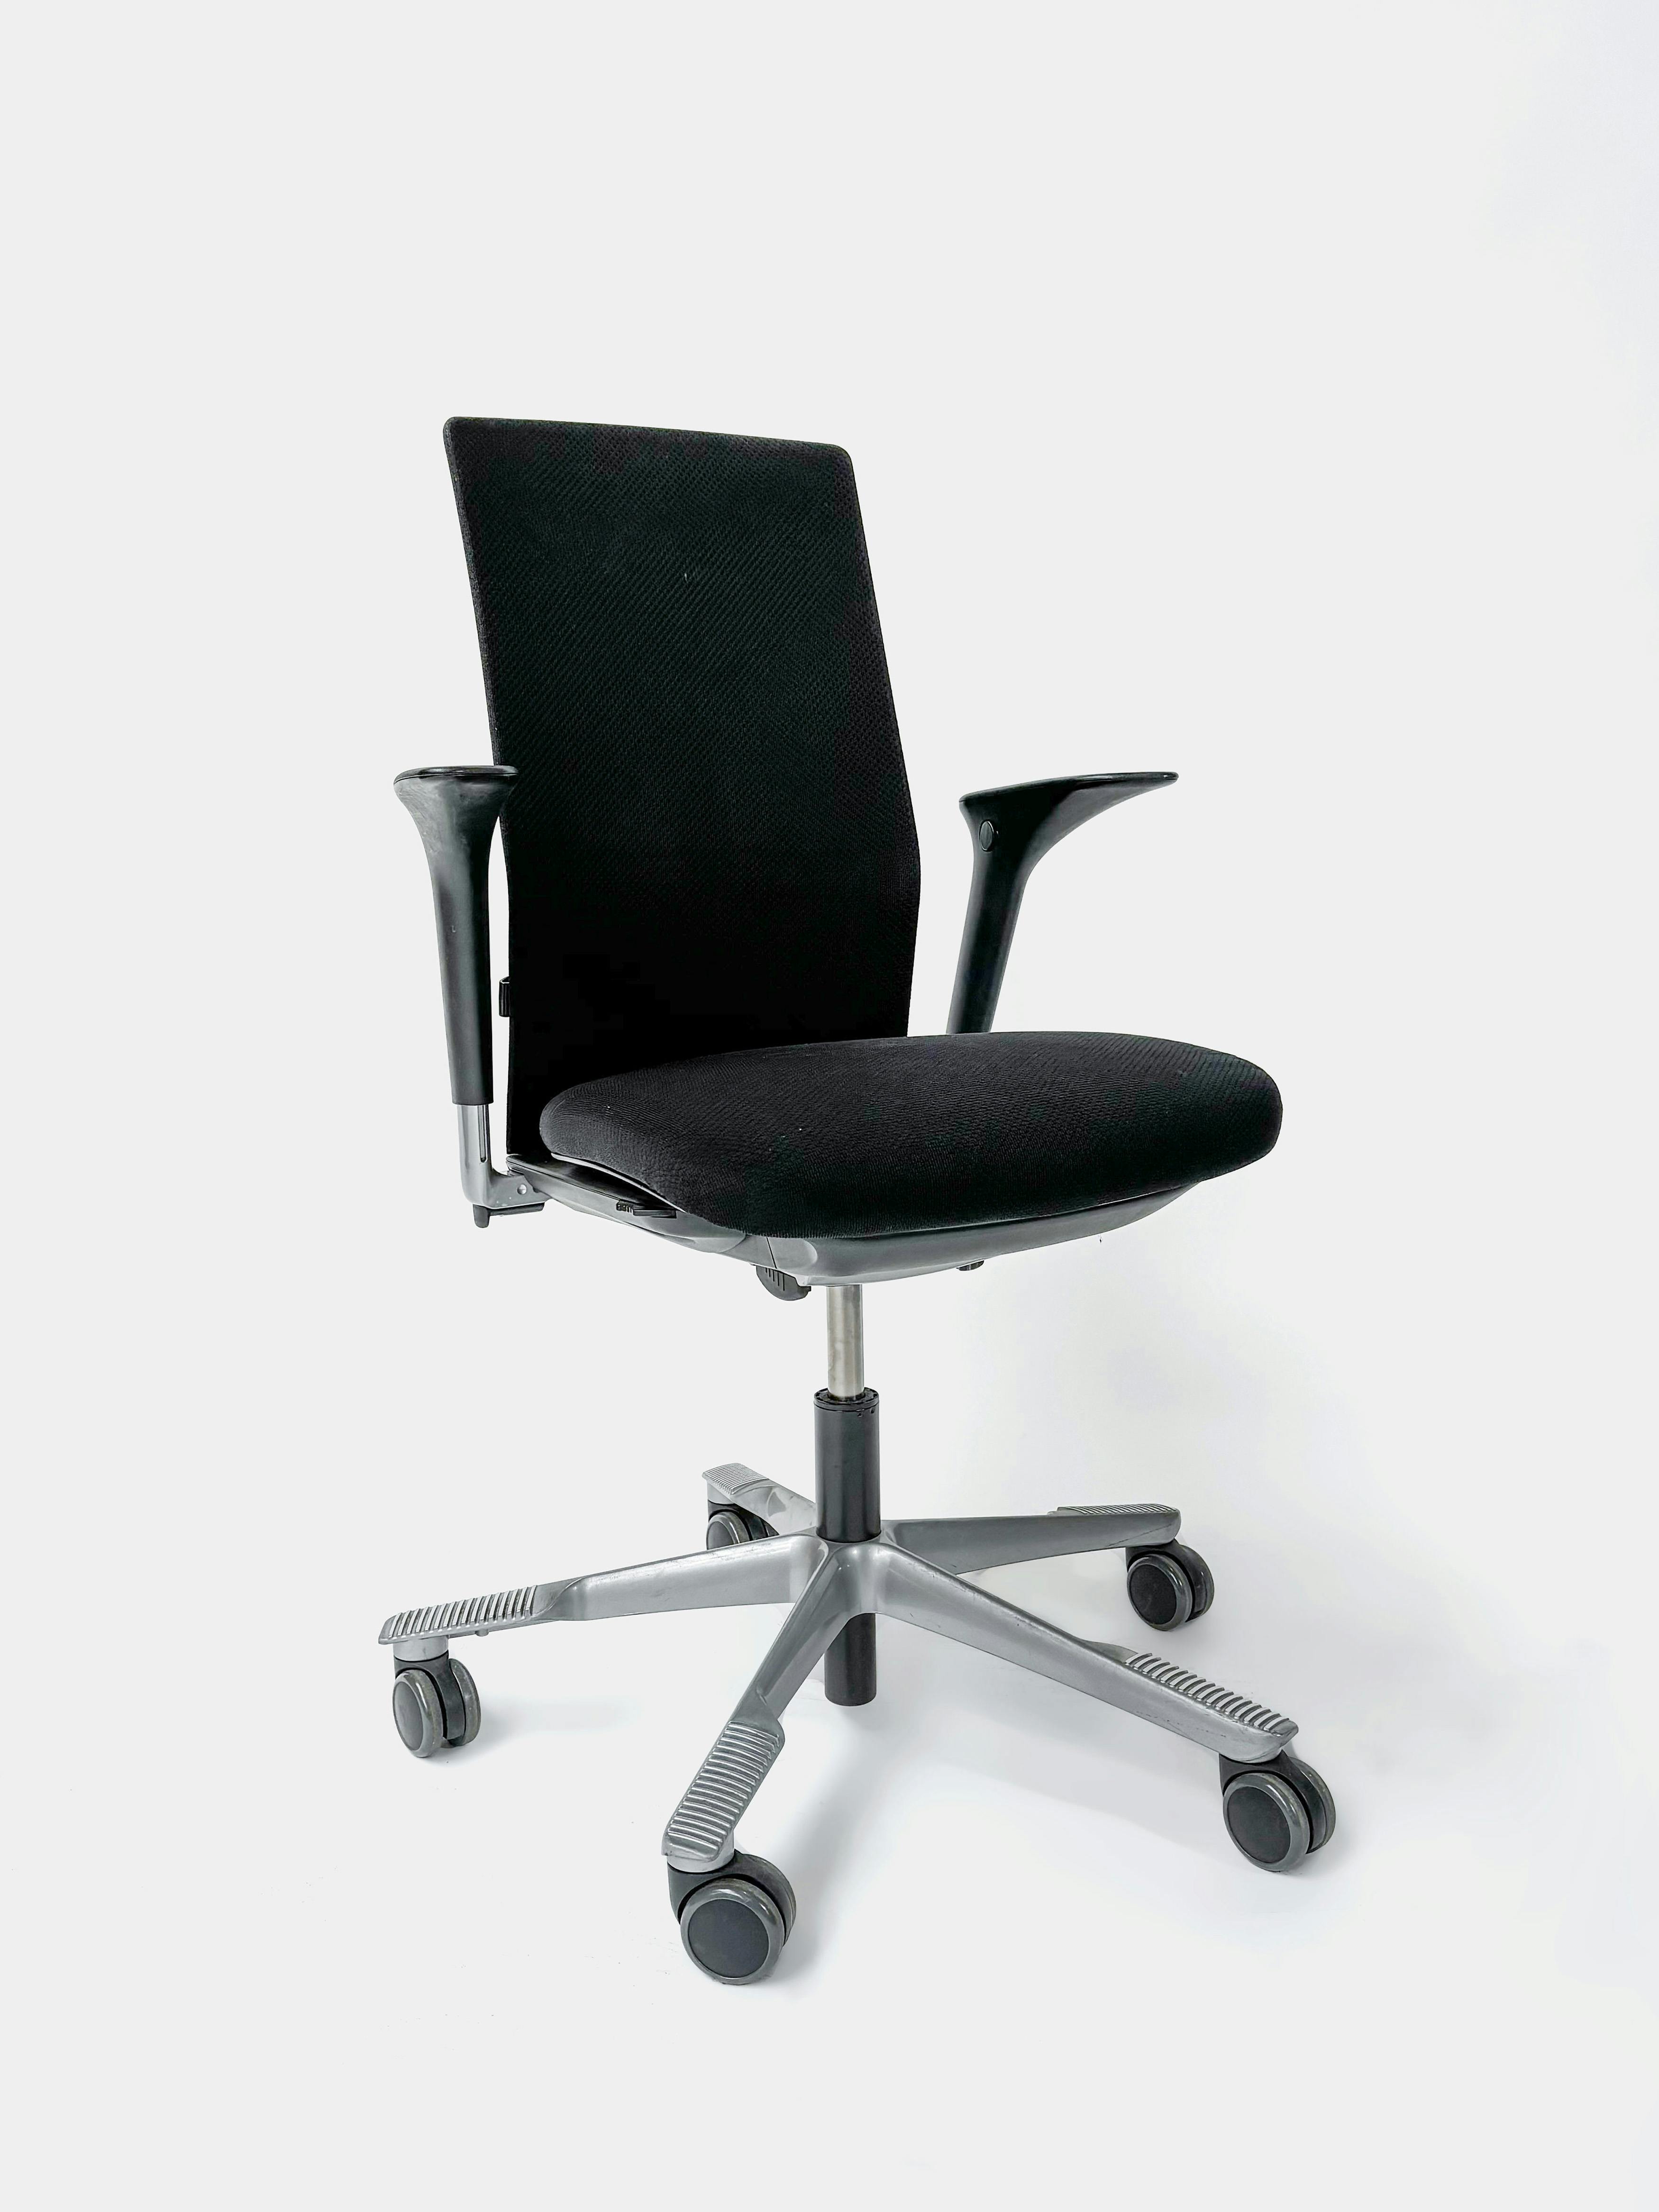 HAG black office chairs on wheels - Relieve Furniture